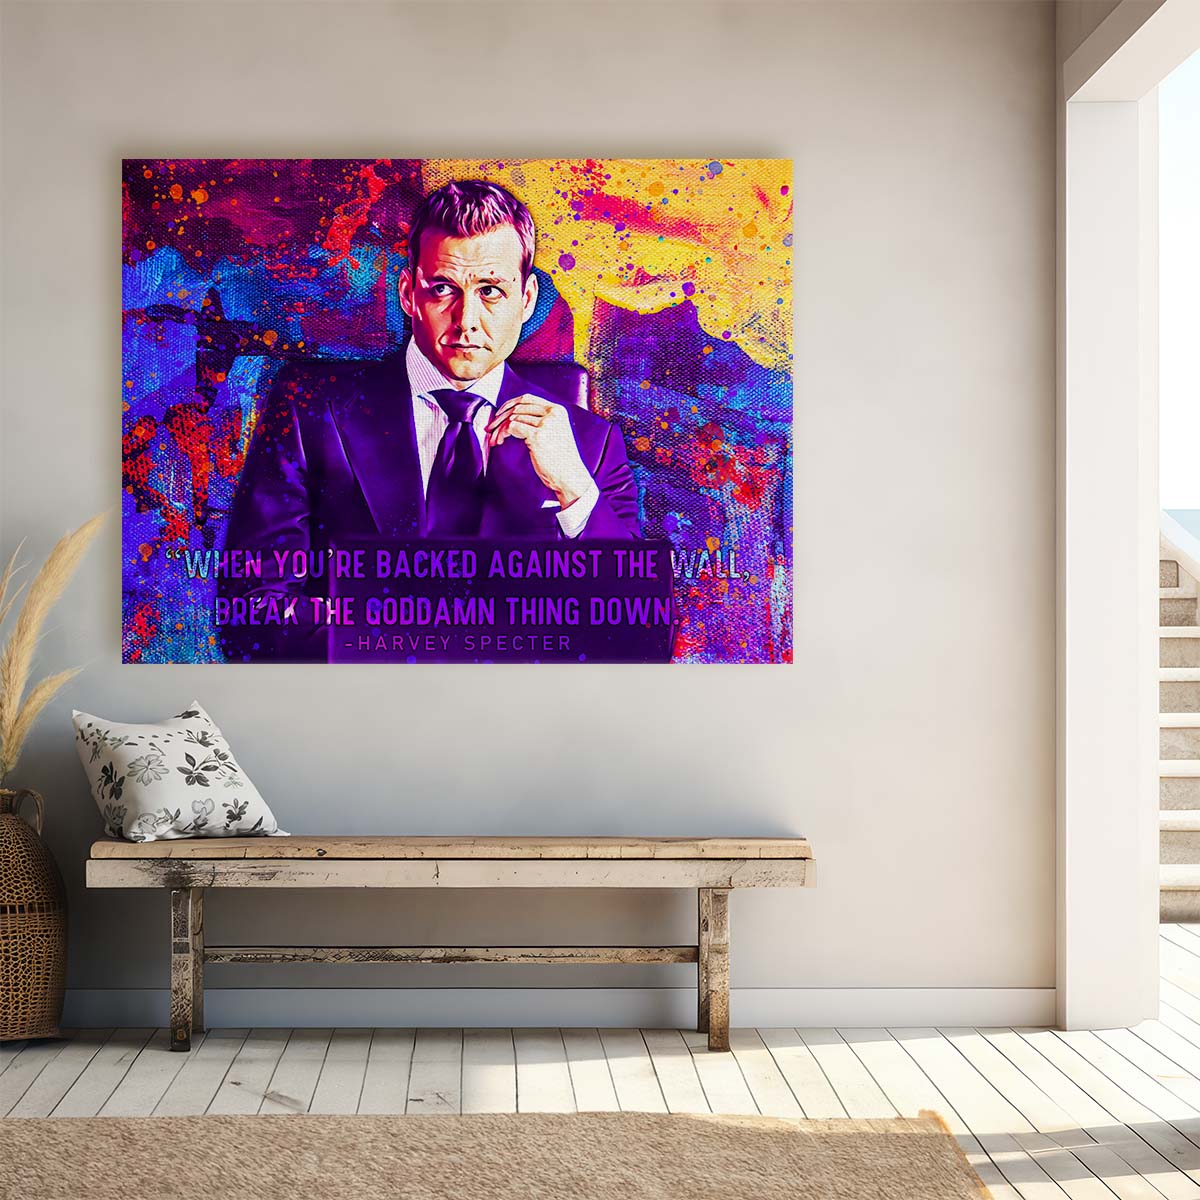 When You're Backed Against The Wall Harvey Specter Wall Art by Luxuriance Designs. Made in USA.